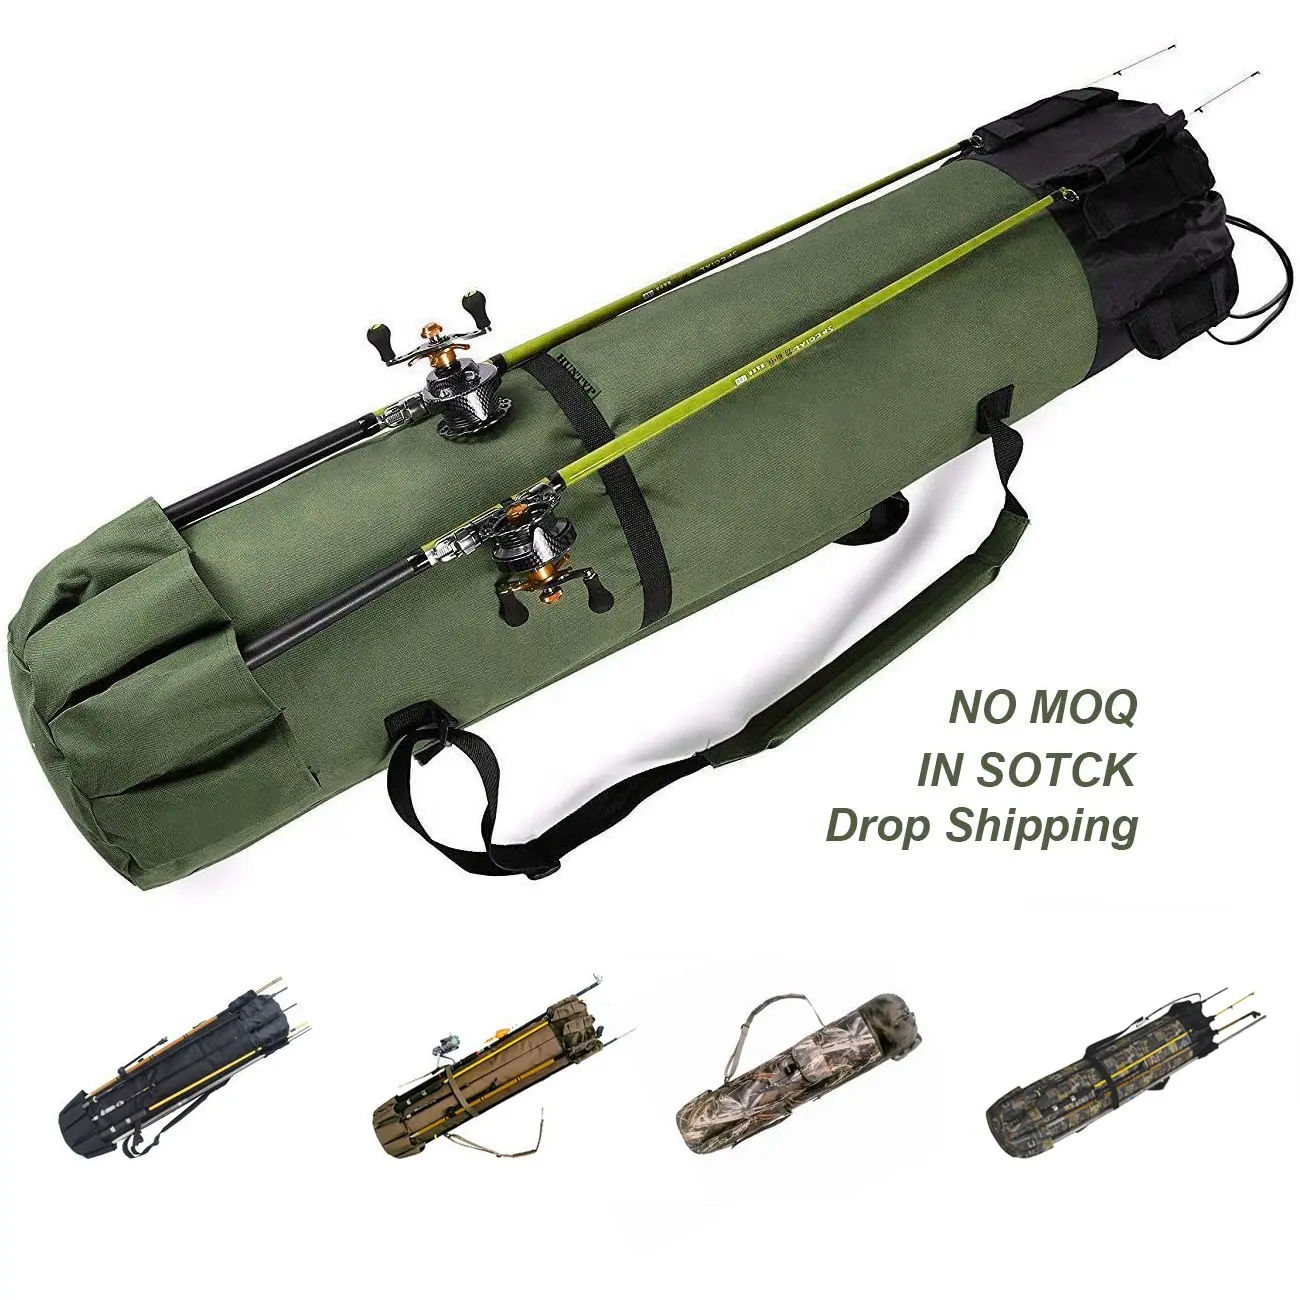 Wholesale Waterproof Portable Heavy Duty Large Capacity Fly 155センチメートルHolder Colourful Carrying Case Hard Fishing Tackle Rod Bag